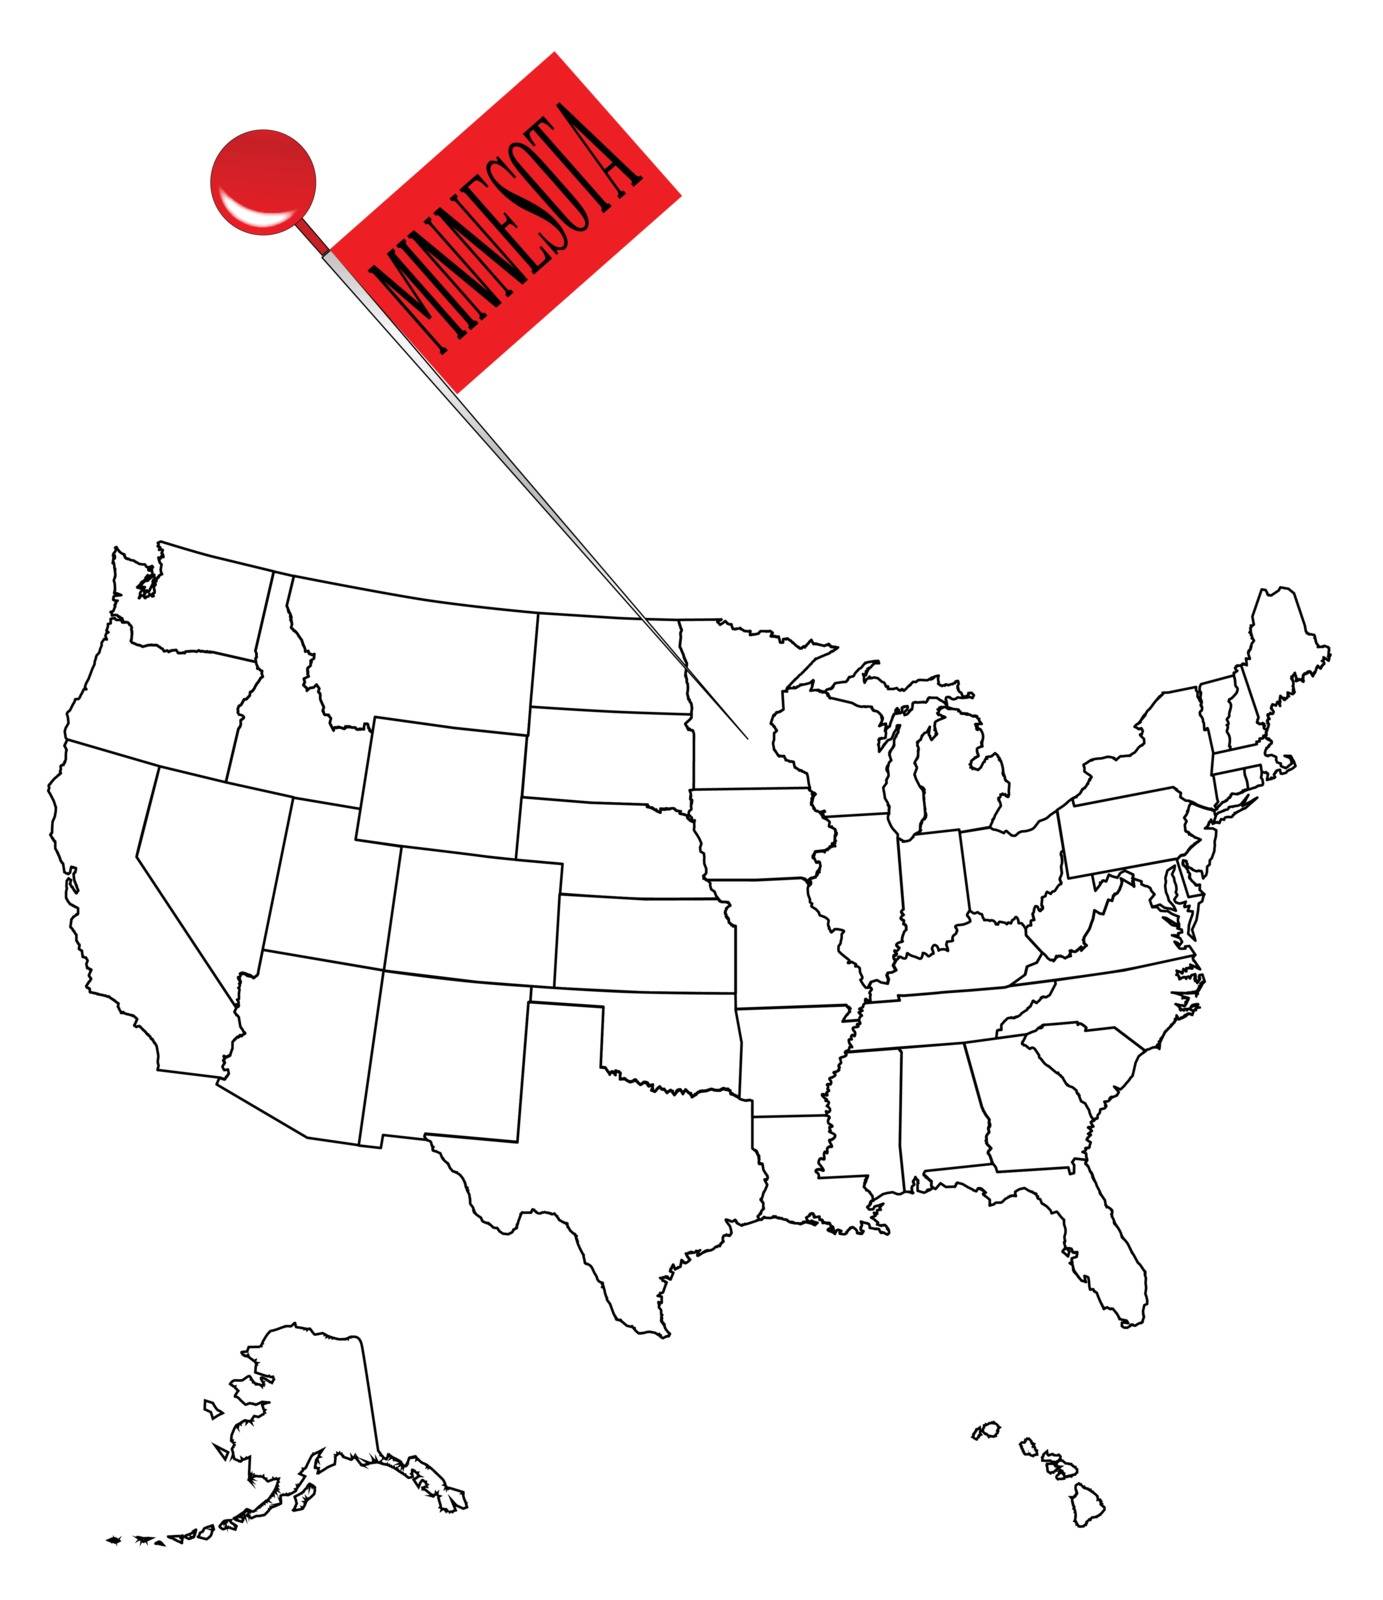 An outline map of USA with a knob pin in the state of Minnesota